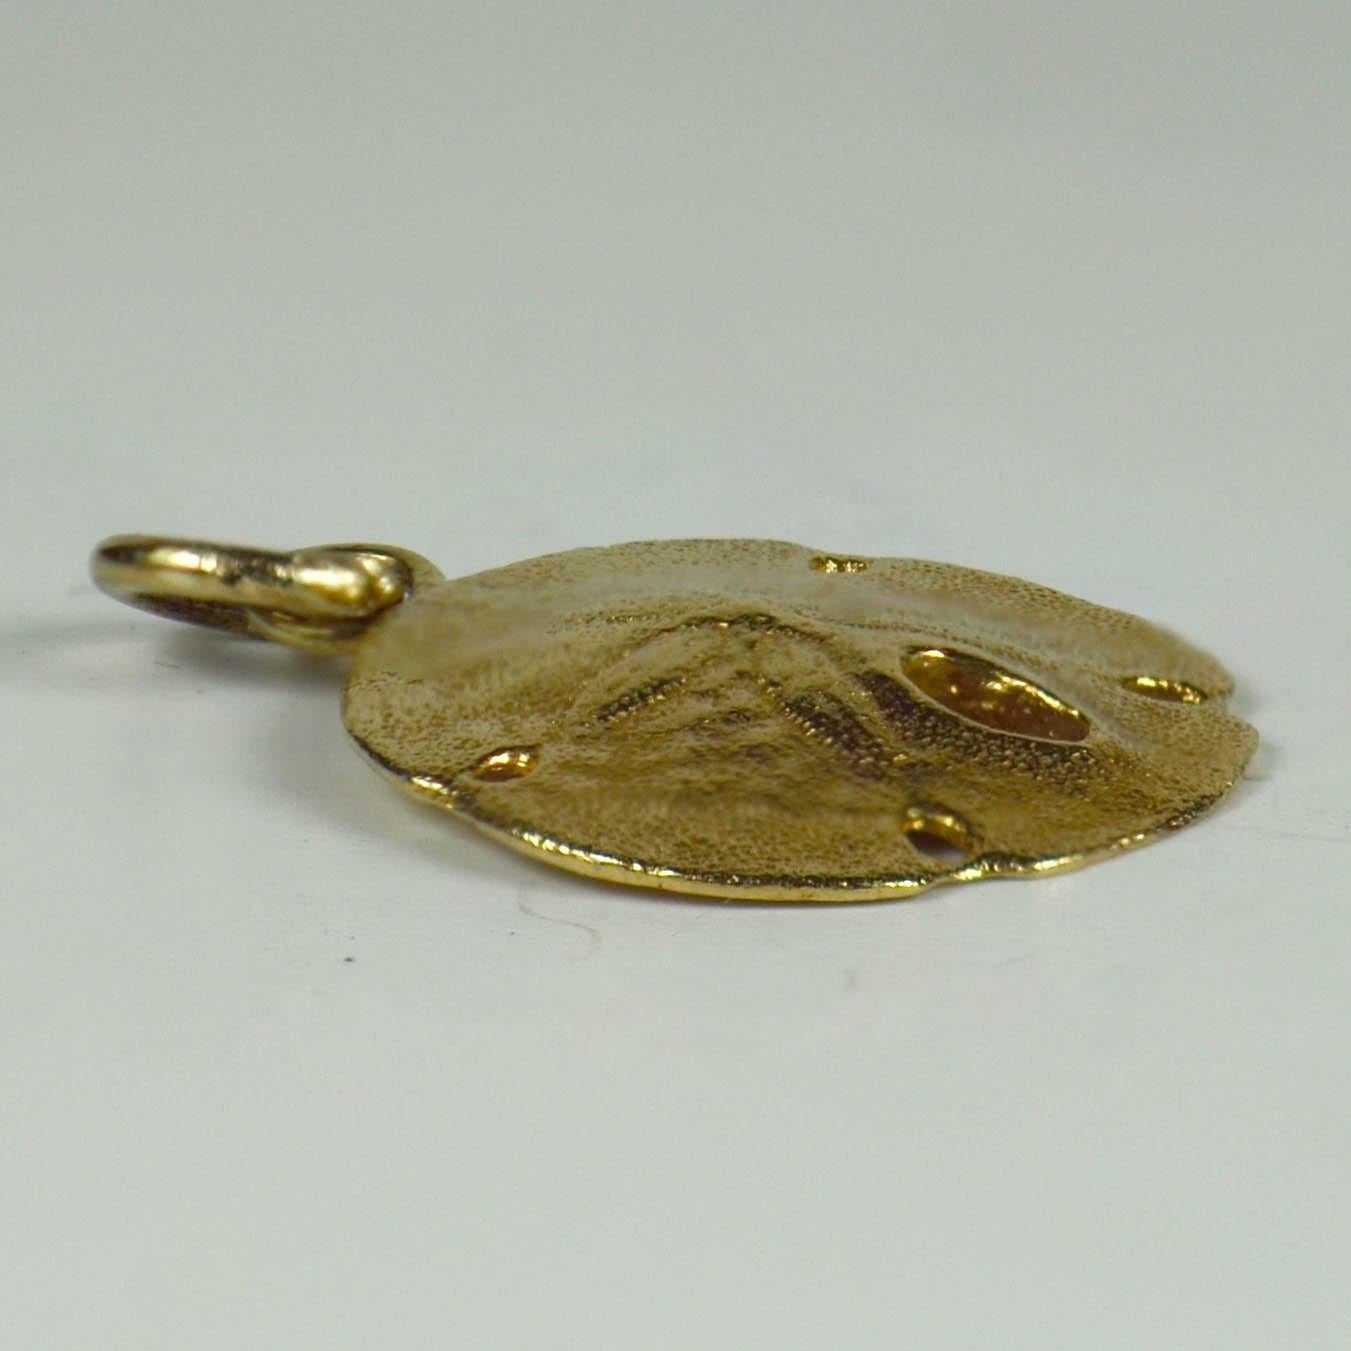 A 14 karat yellow gold charm pendant designed as a three dimensional sand dollar - a member of the sea urchin family. 
Marked 14K.

Dimensions: 2.2 x 1.6 x 0.3 cm
Weight: 2.07 grams.